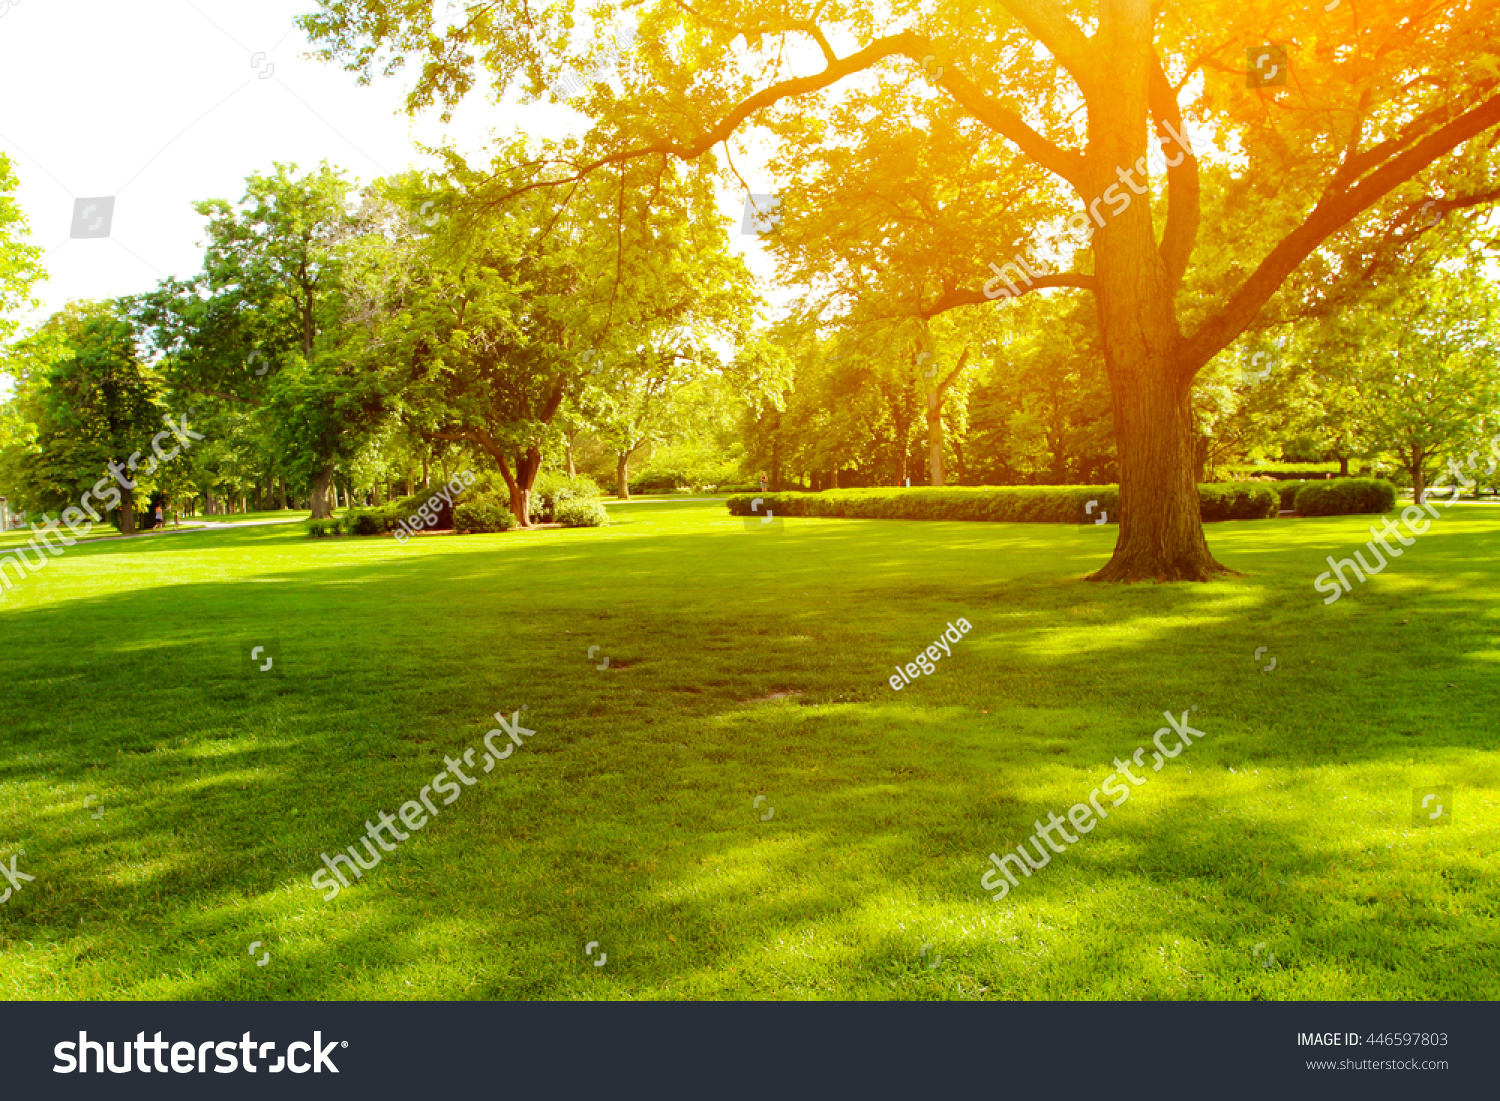 Beautiful summer landscape with trees and green grass #446597803